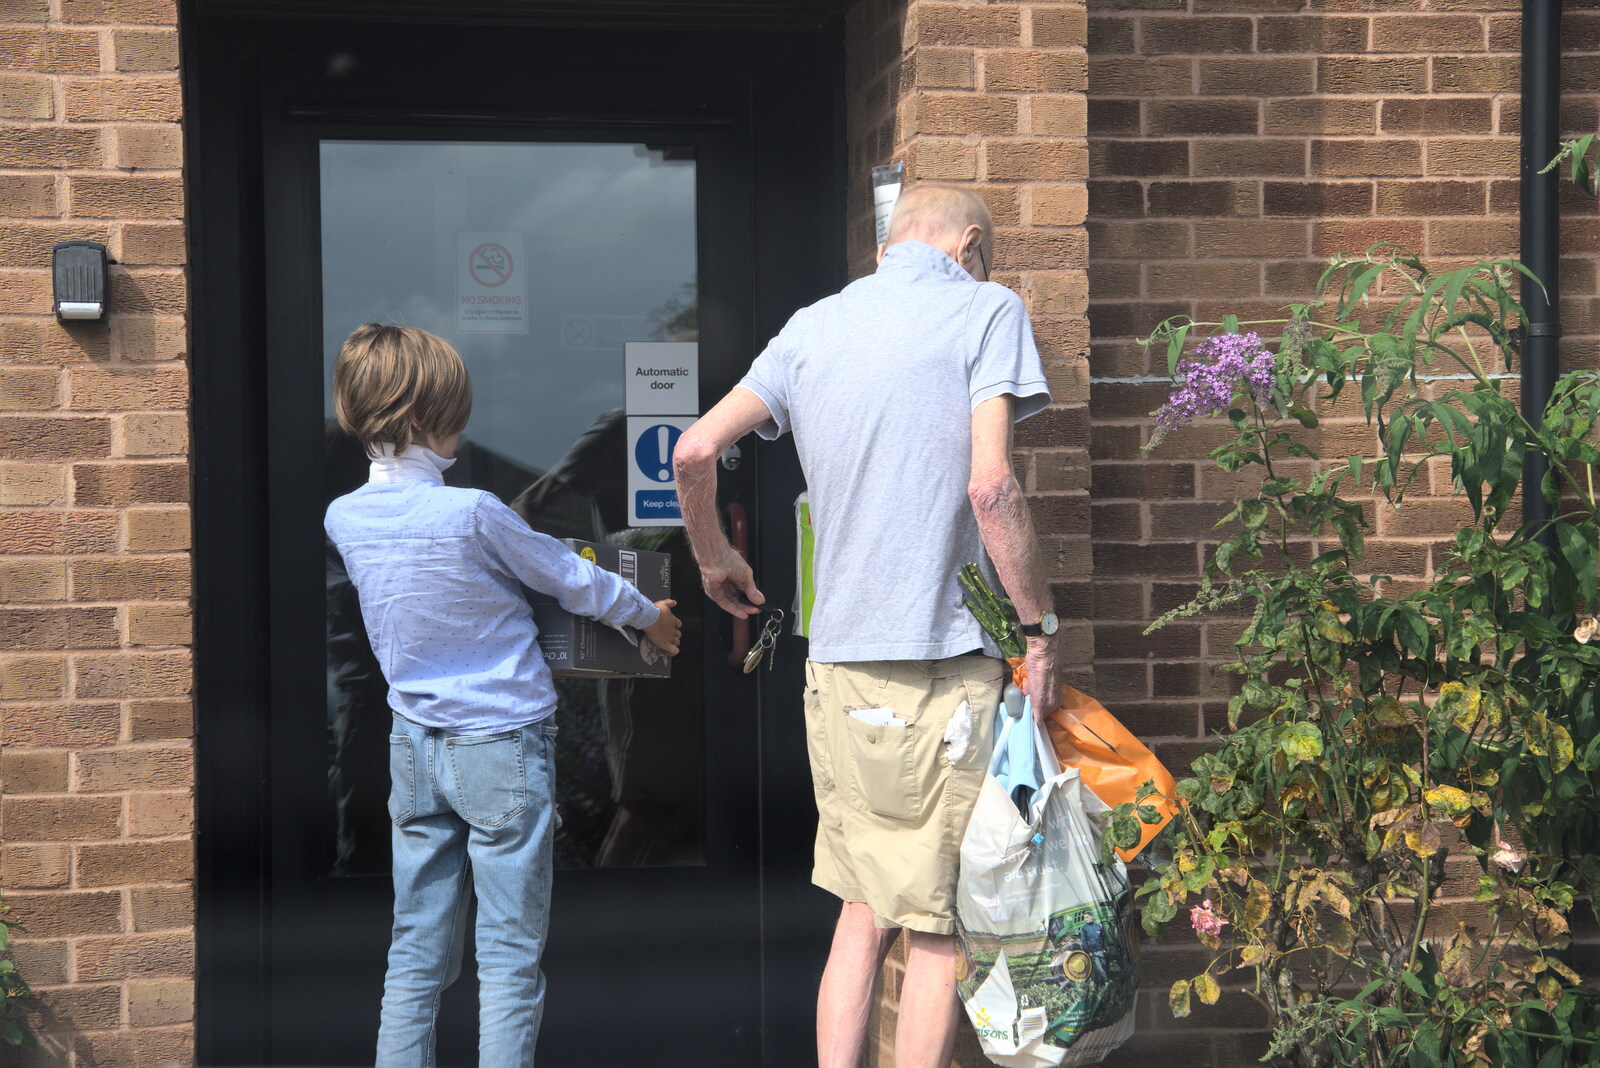 A July Miscellany, Diss, Eye and Norwich - 23rd July 2022: Harry helps Grandad in with his shopping